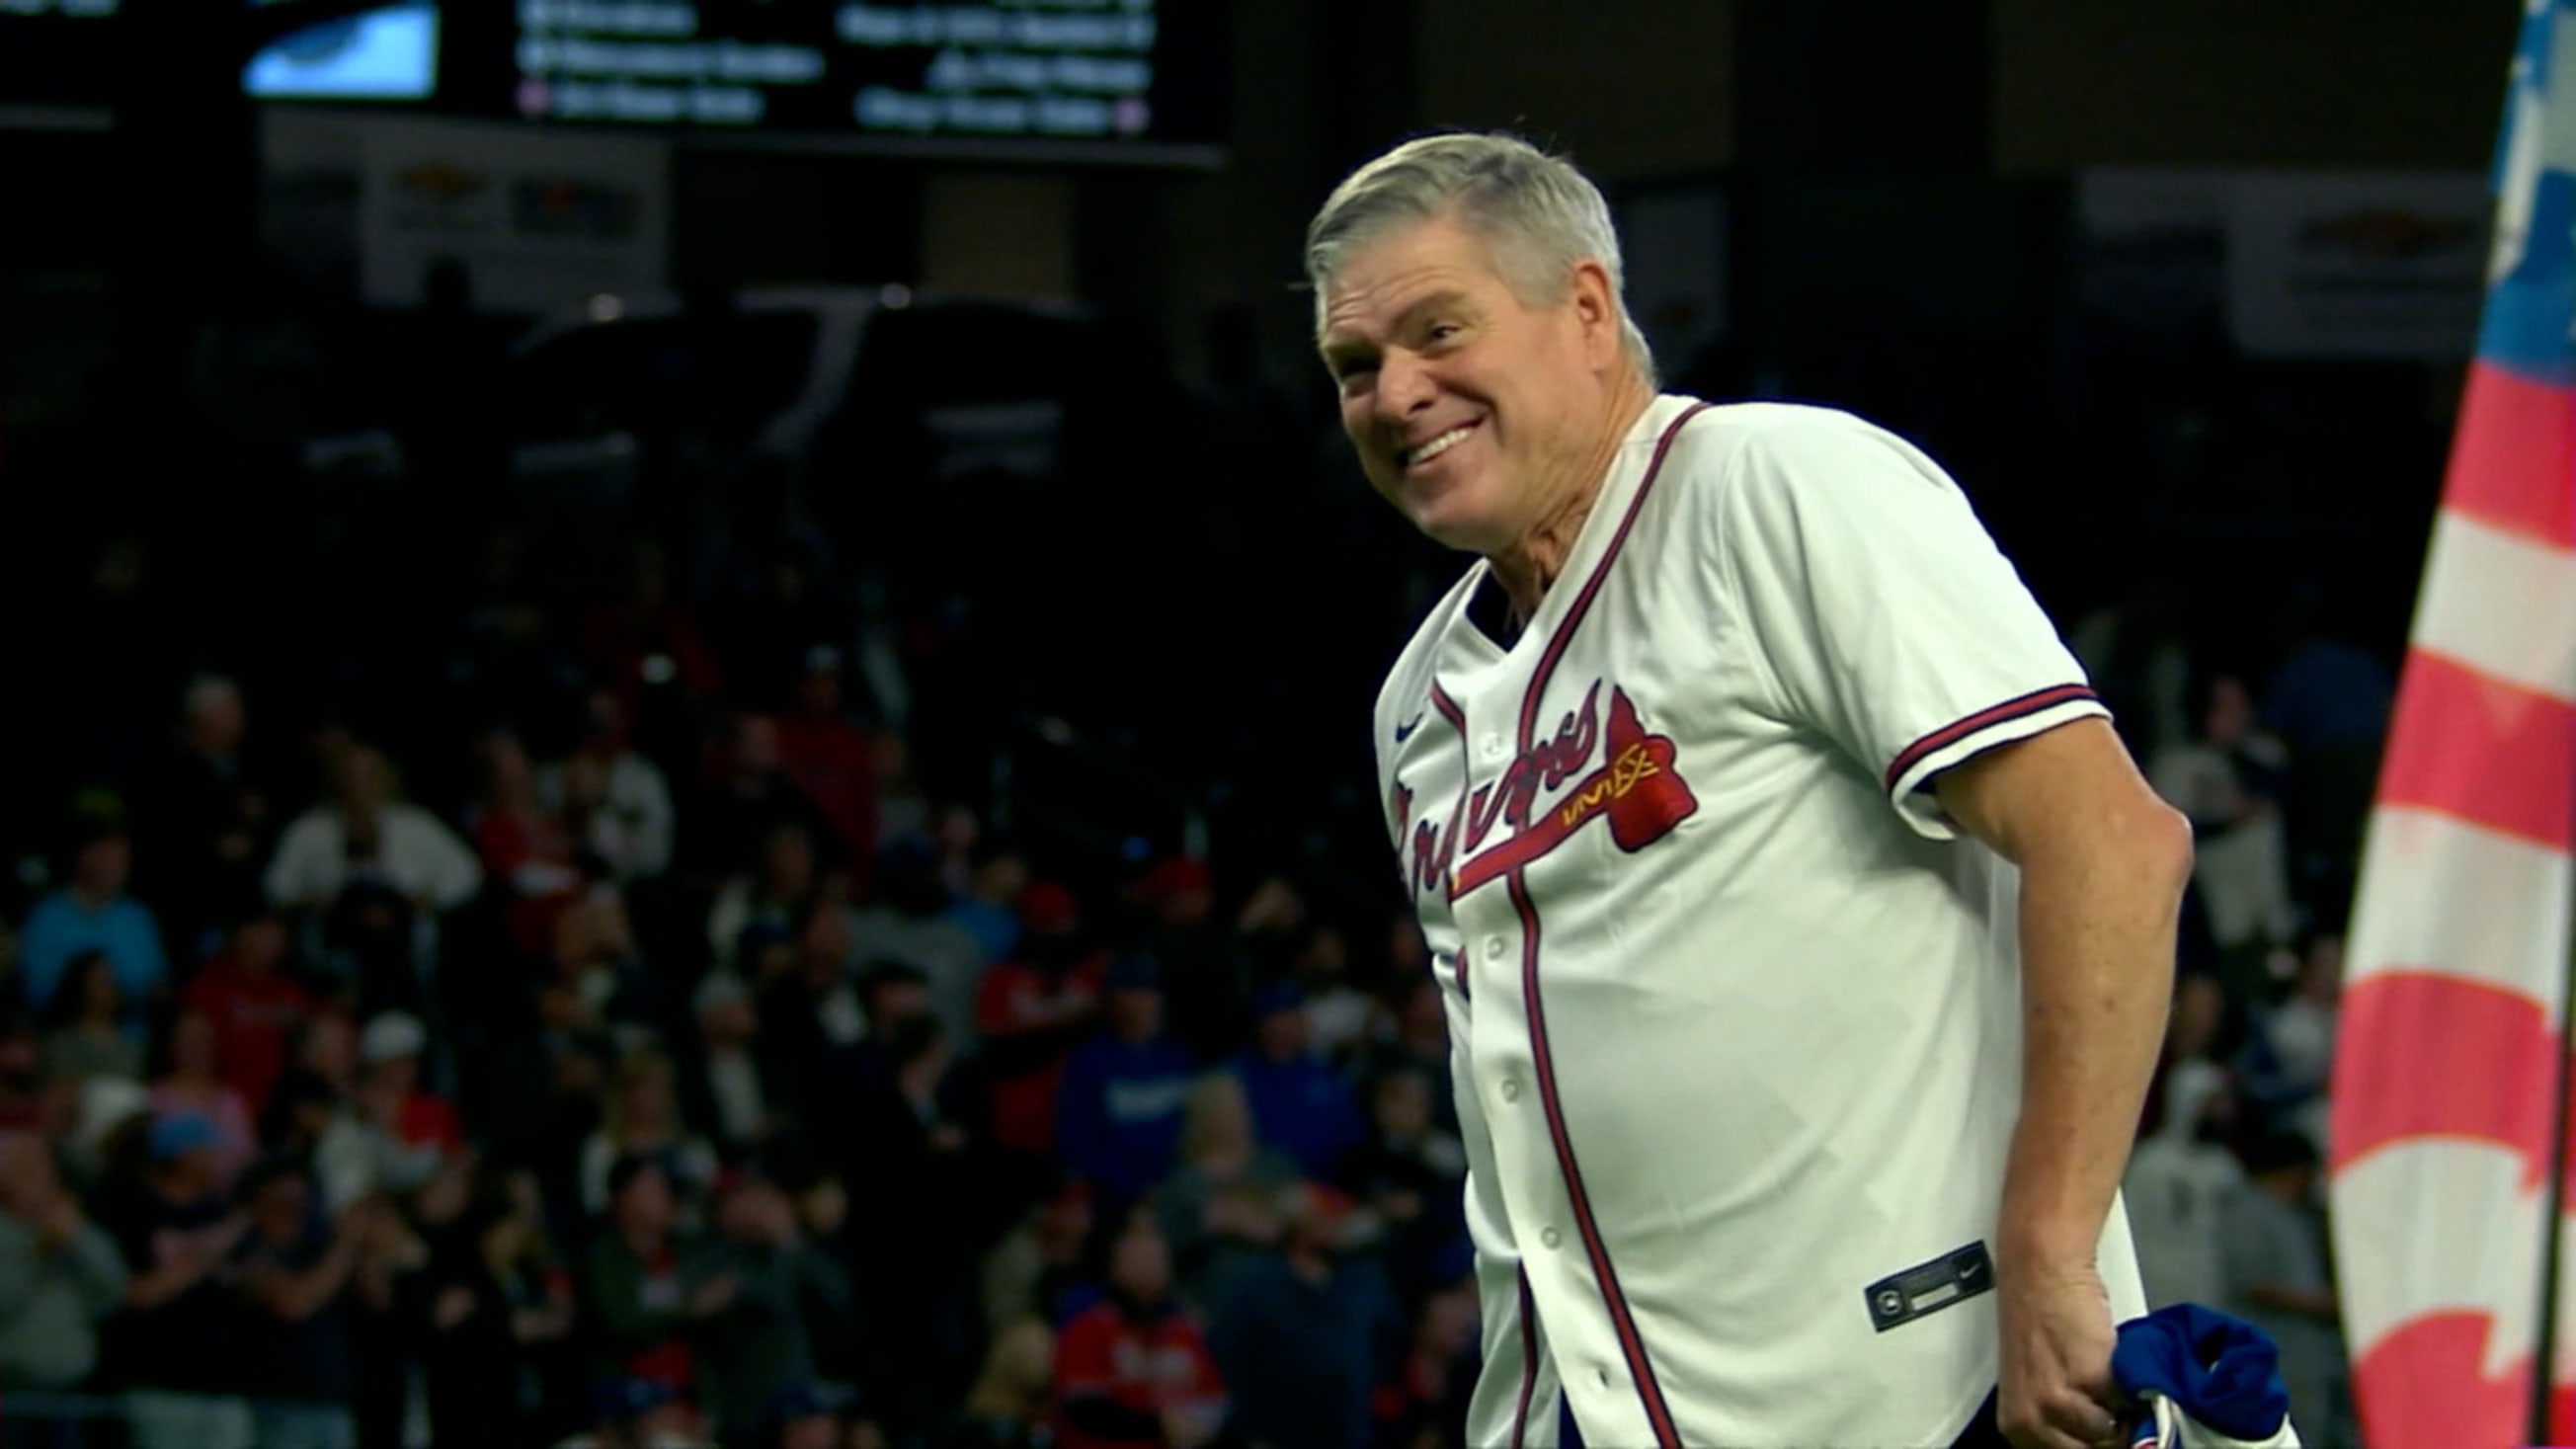 Dale Murphy's son Jake proposes after throwing out first pitch